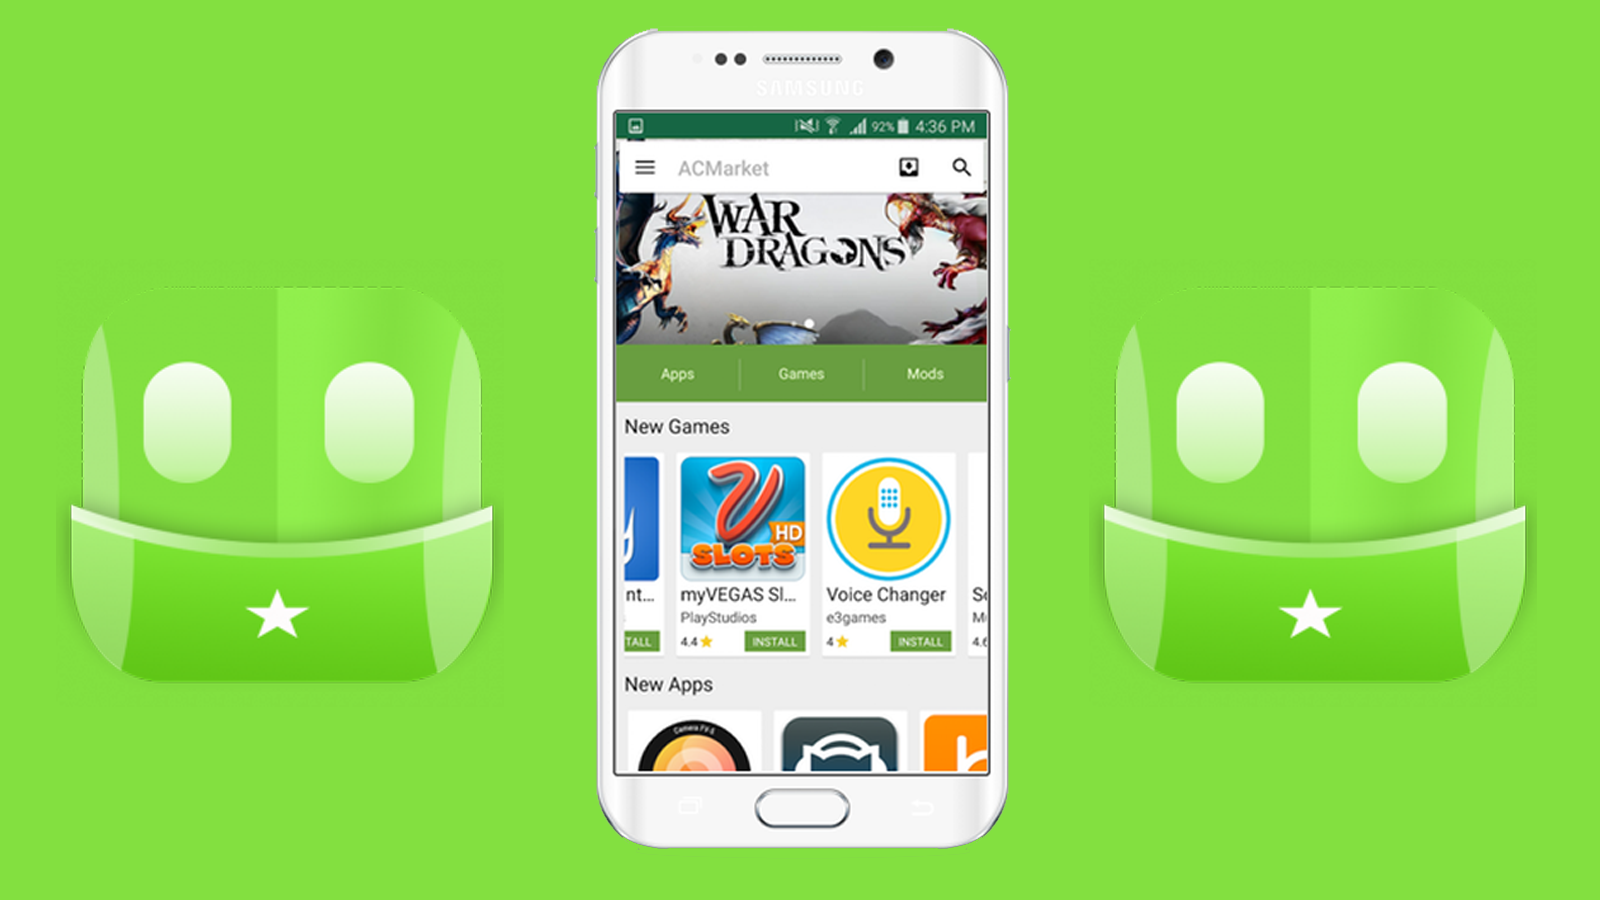 ACMarket Apk Download For Android Games And Apps 100% Free